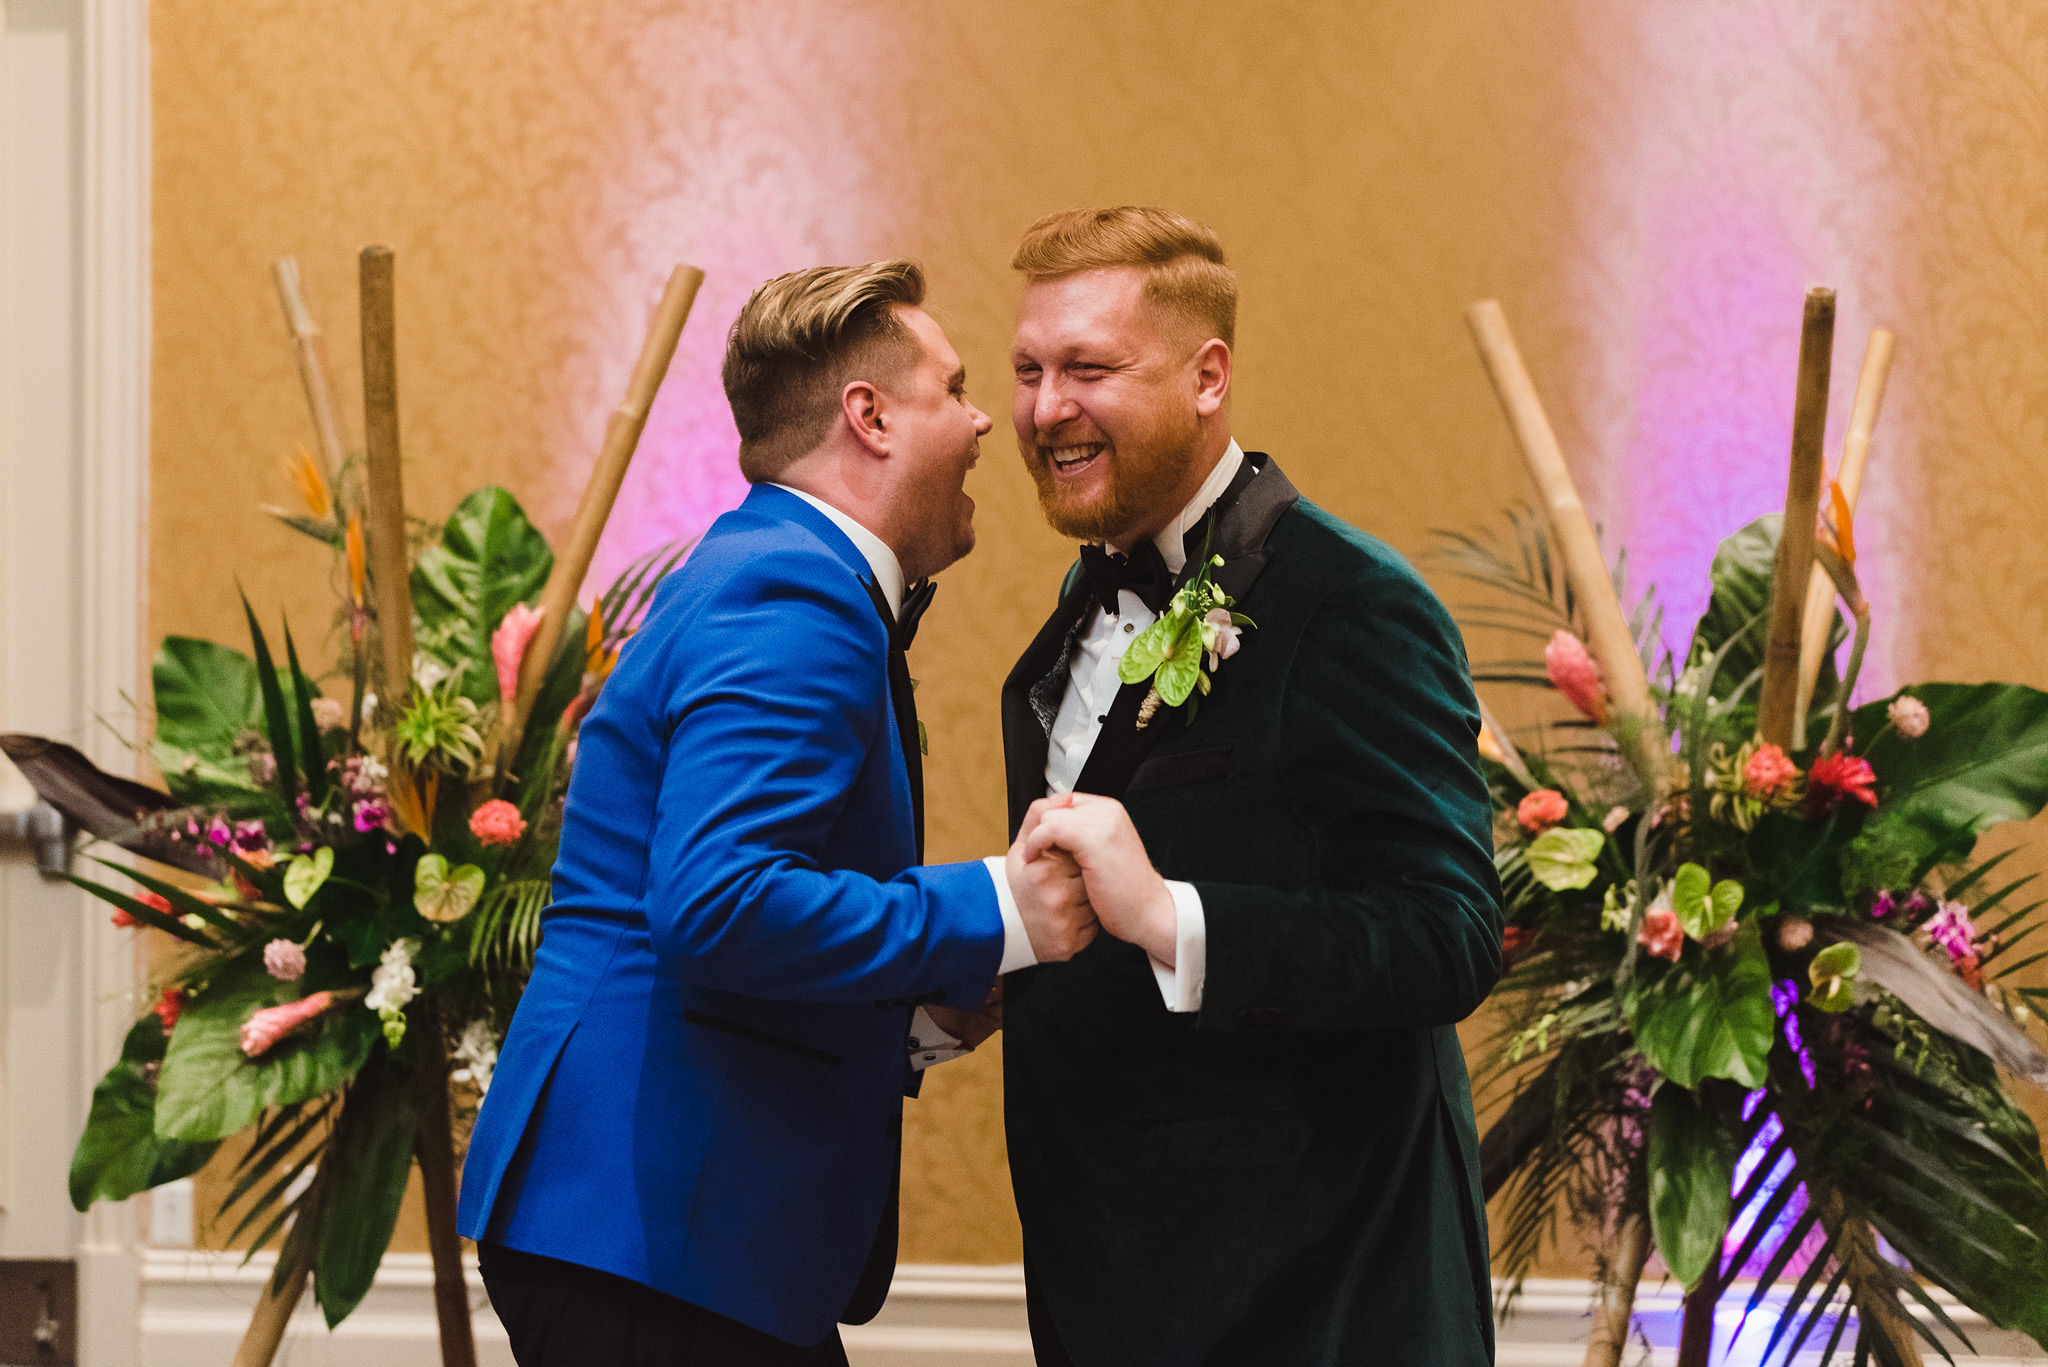 grooms holding hands and laughing hard after their wedding at the Hilton Fallsview in Niagara Falls